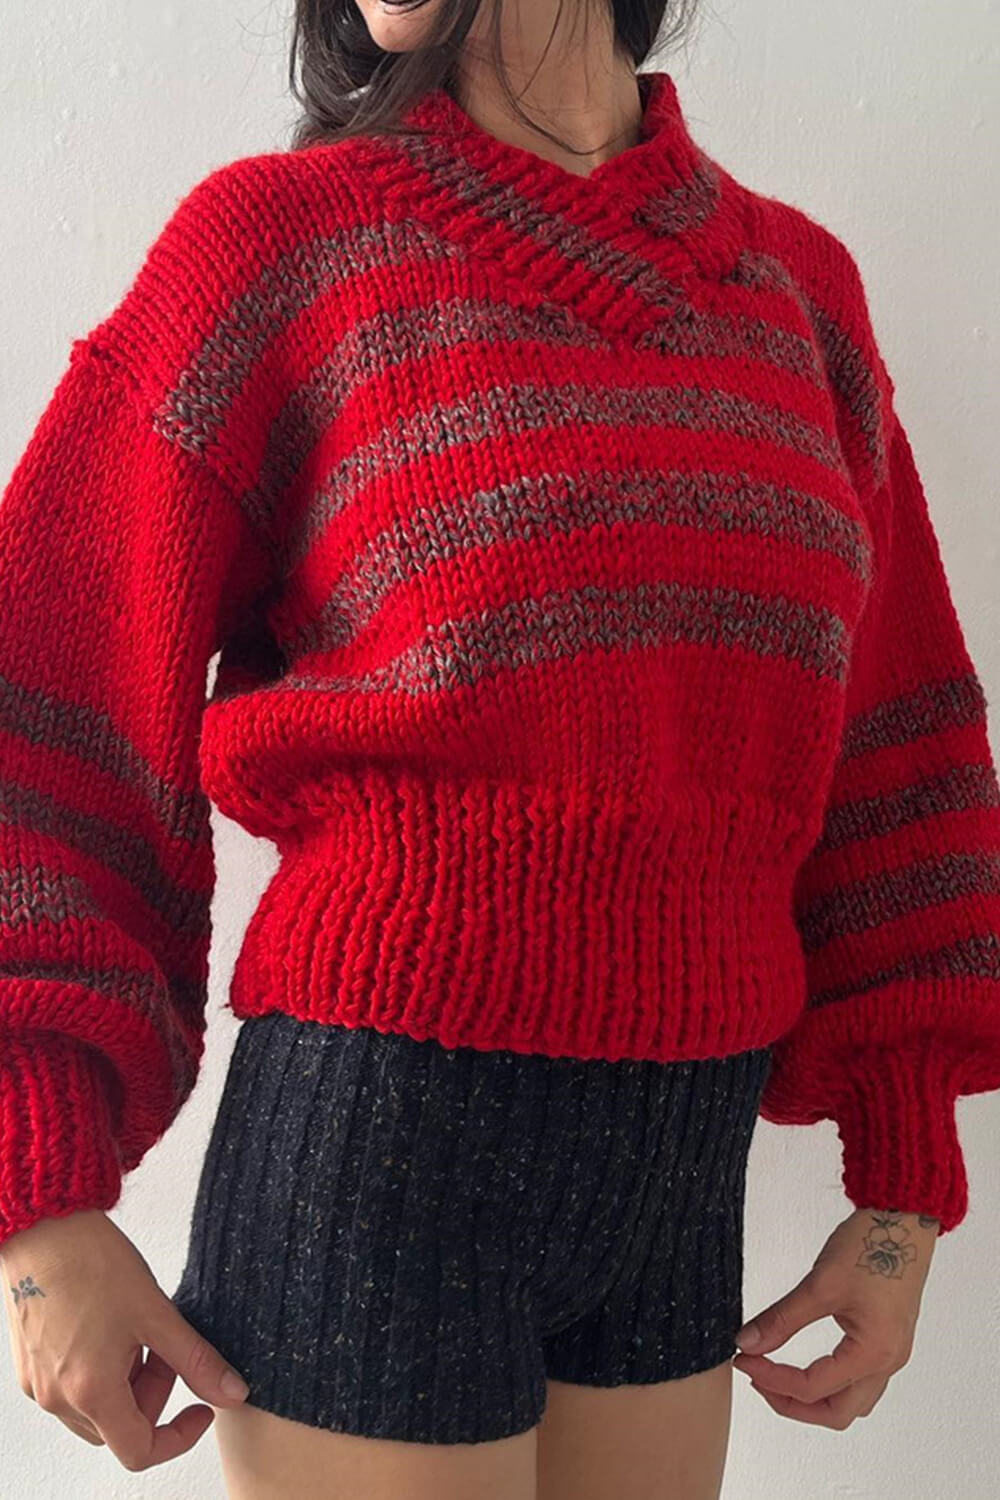 Striped Cross-Neck Knit Sweater - Red